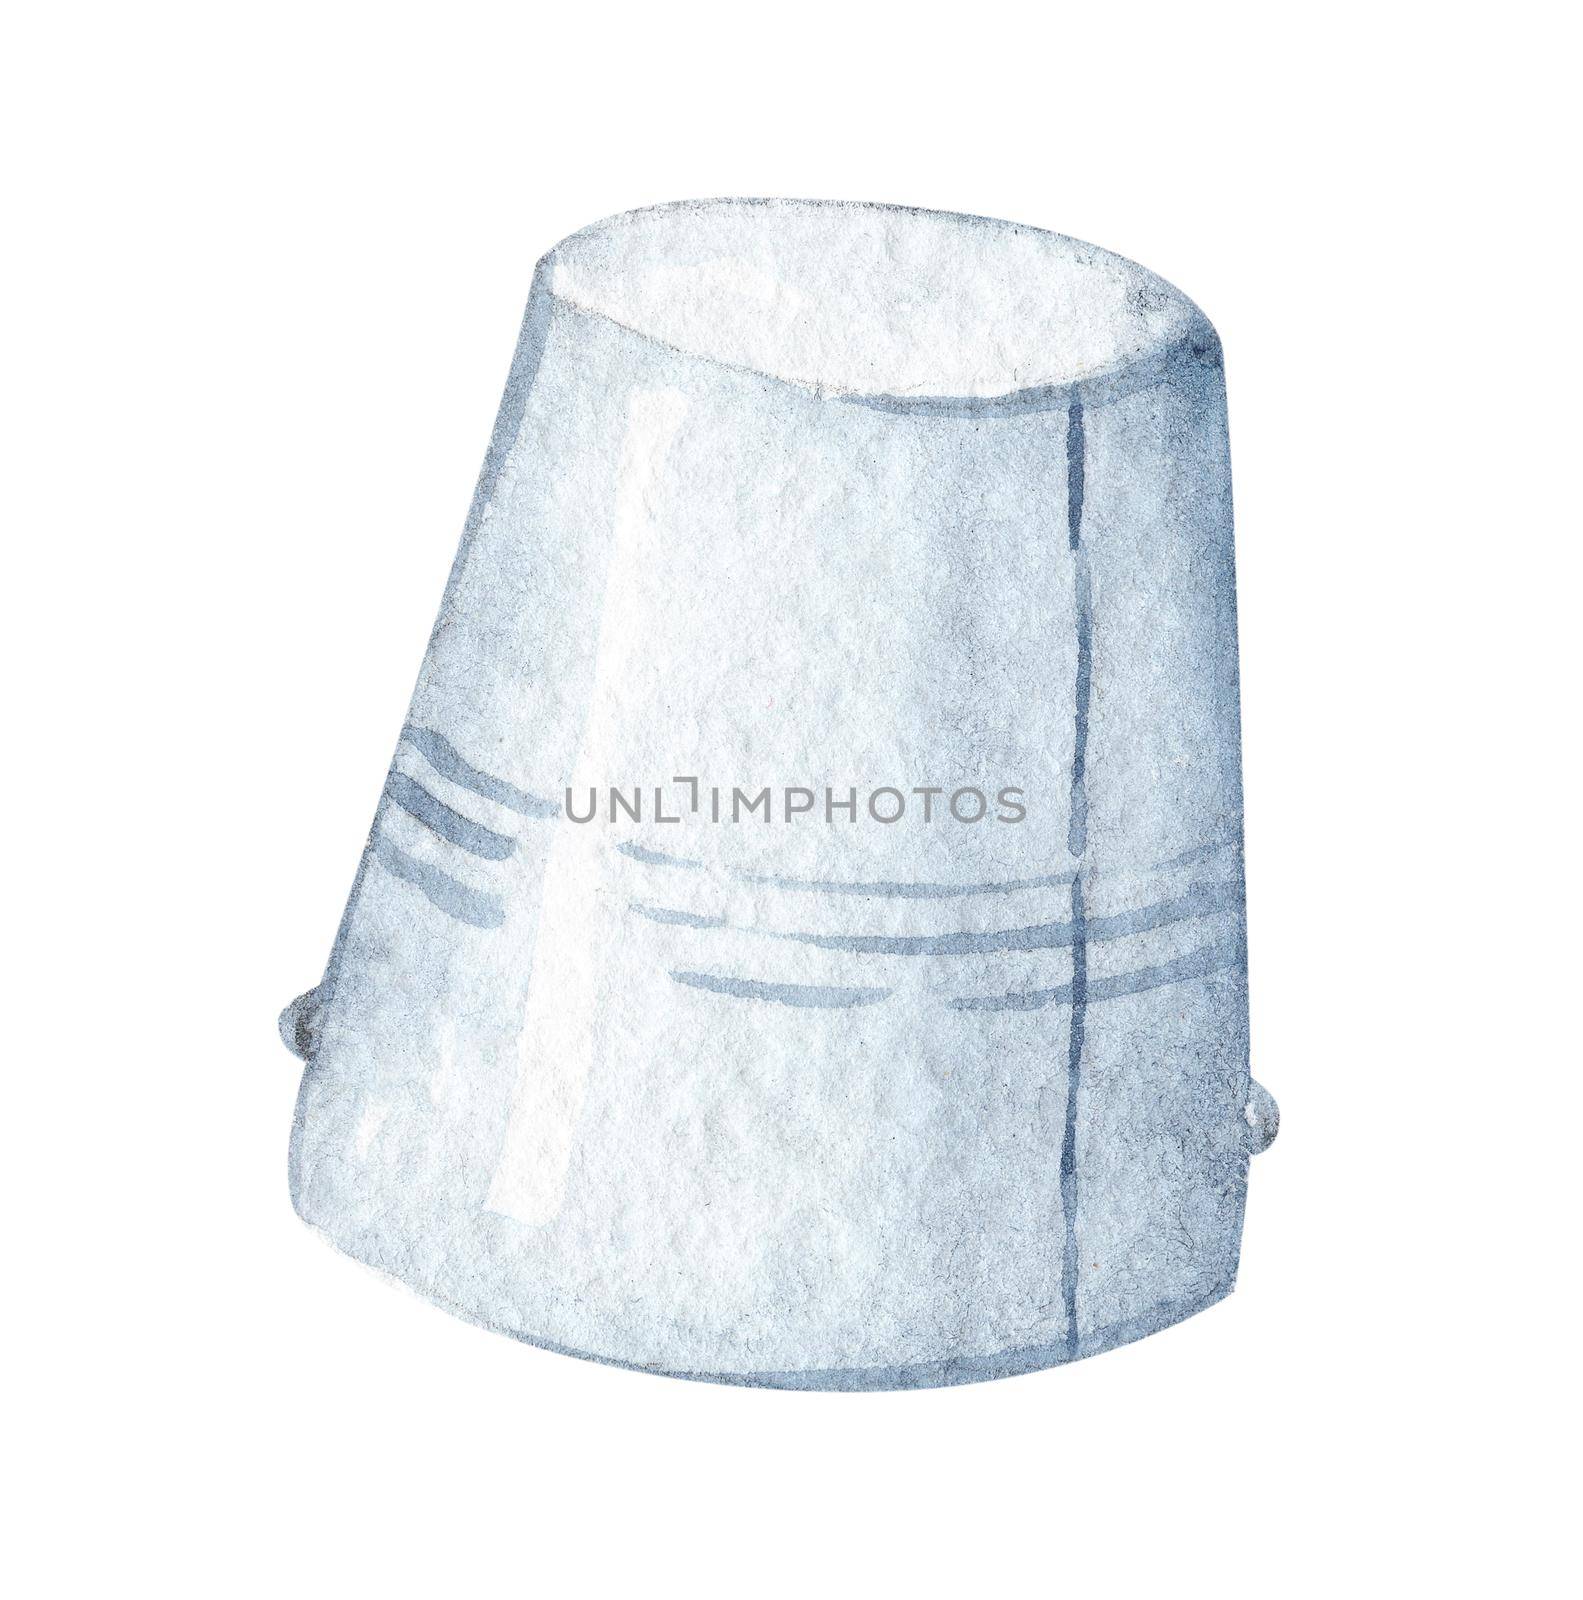 Watercolor steel pail isolated on white background. Snowman hat hand drawn illustration